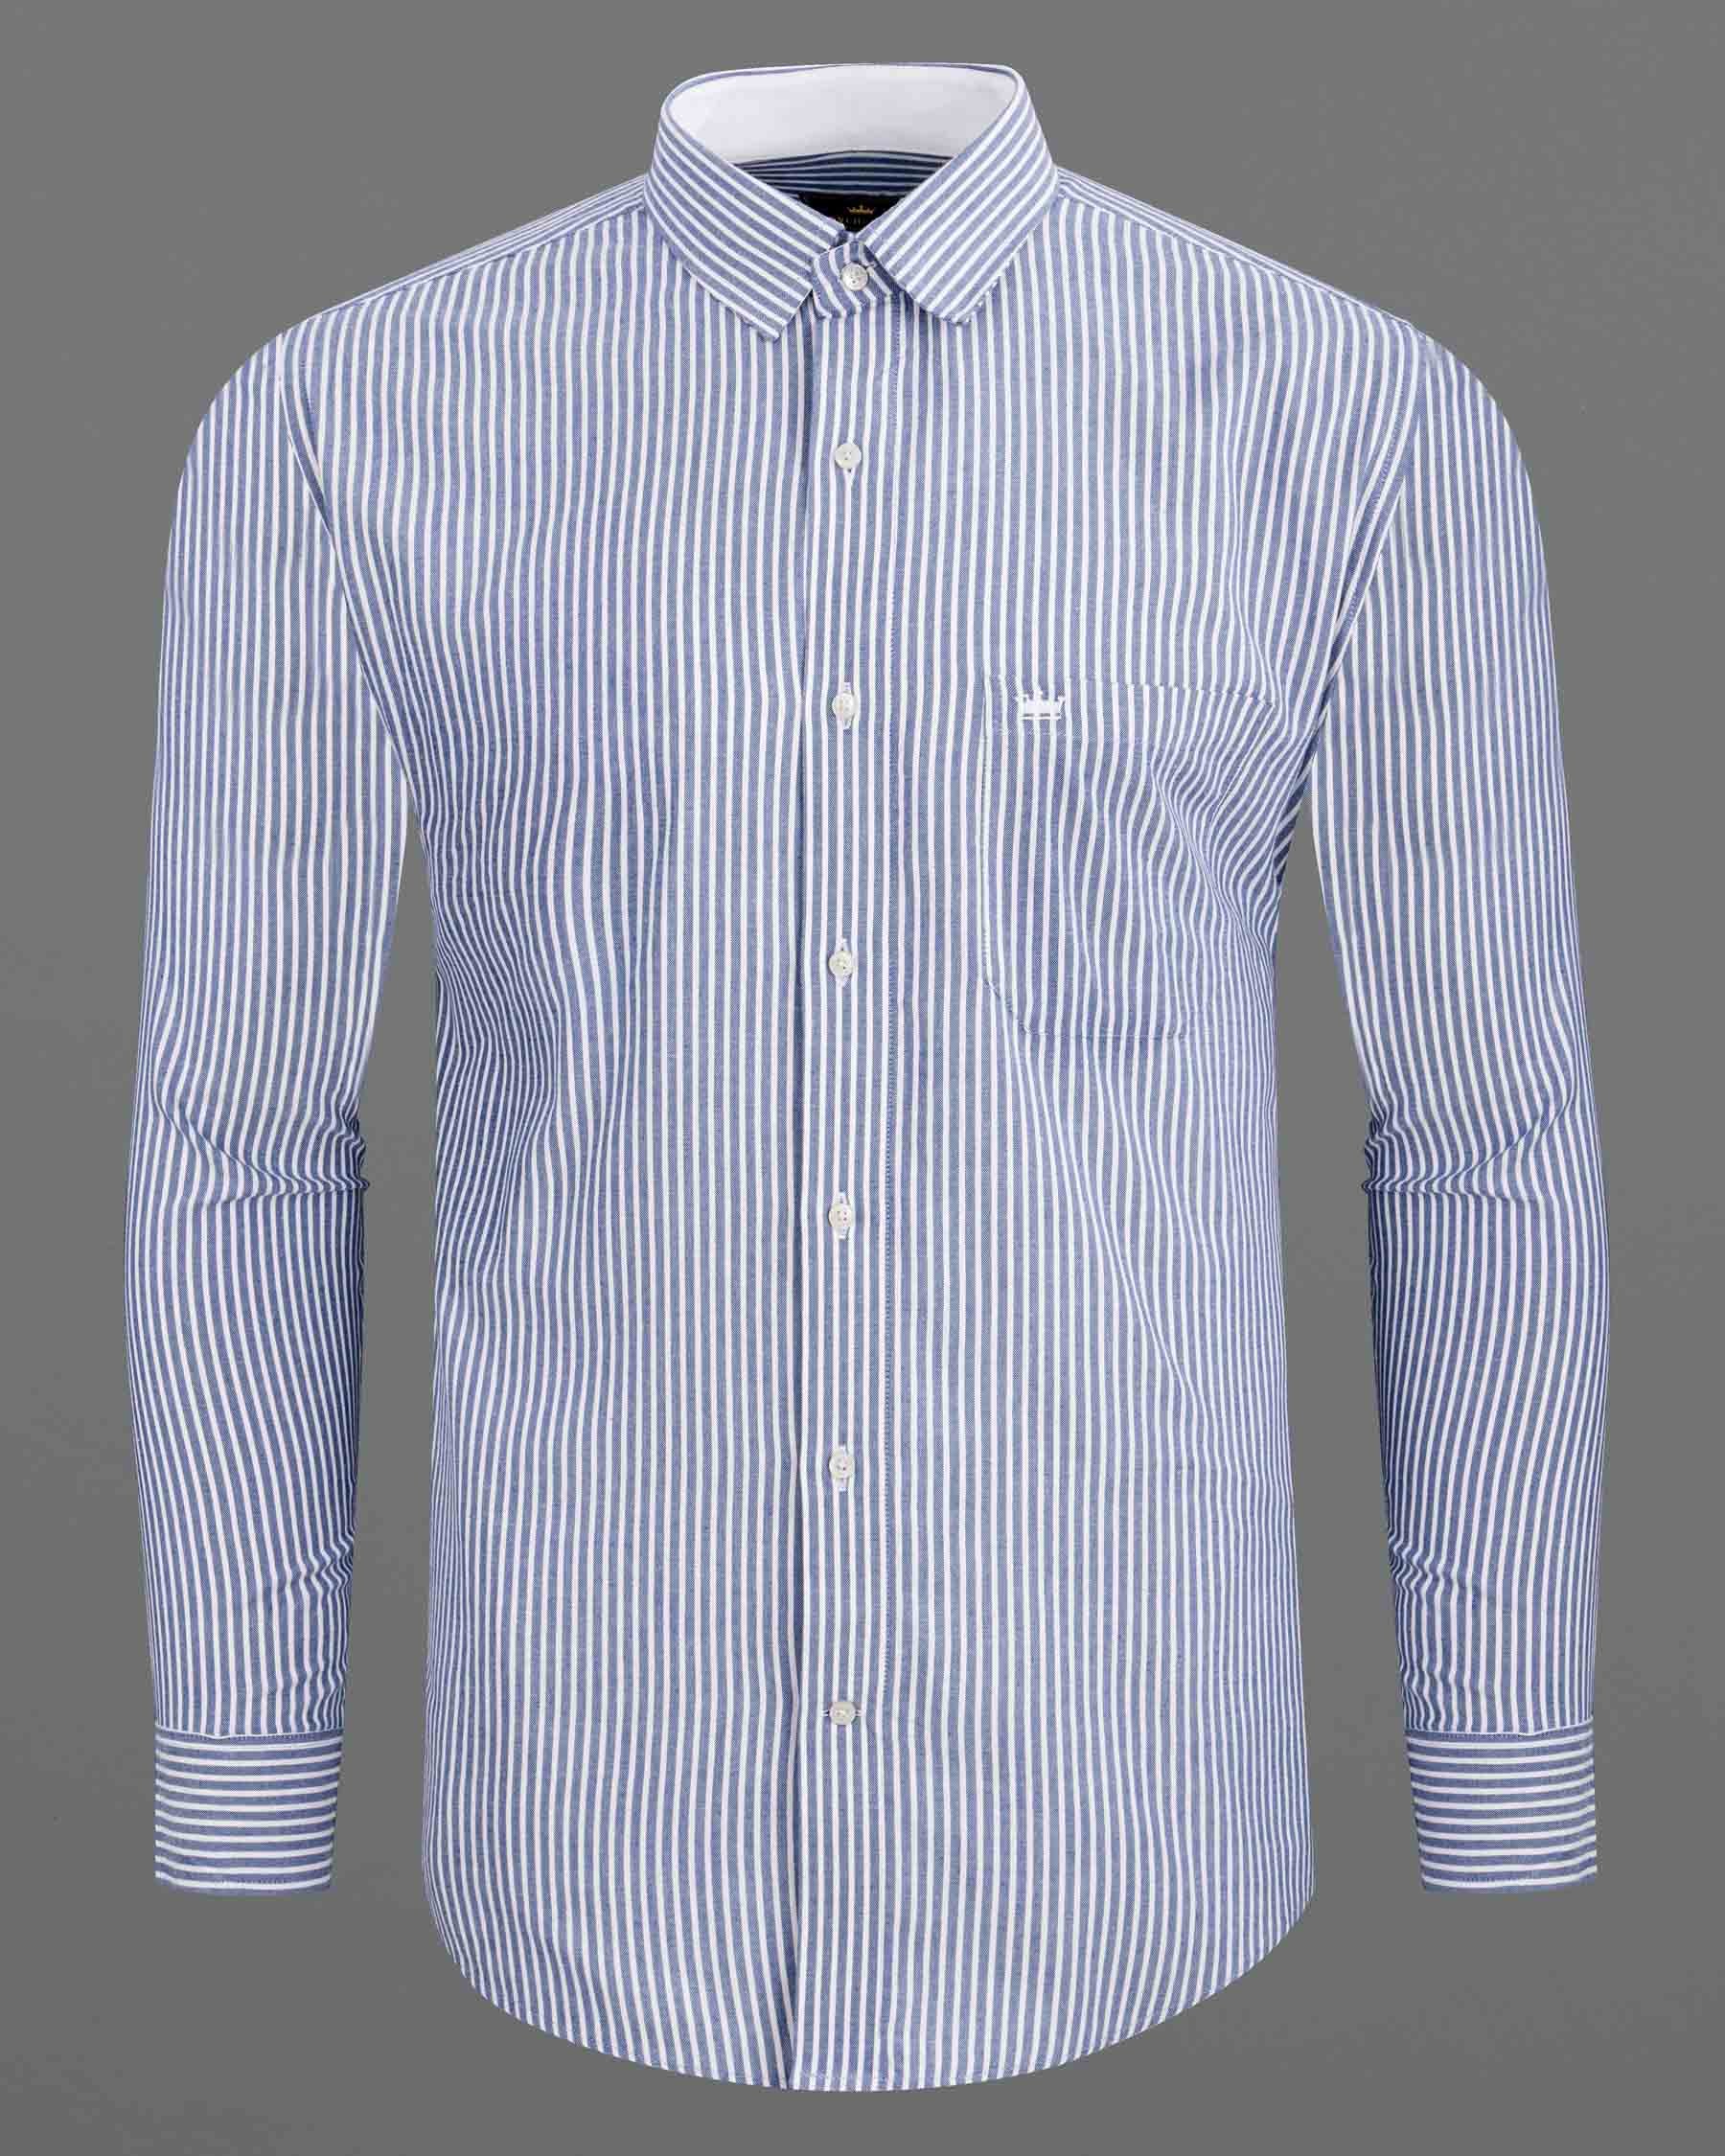 Chetwode Blue with White Striped Royal Oxford Shirt 6345-CP-38,6345-CP-H-38,6345-CP-39,6345-CP-H-39,6345-CP-40,6345-CP-H-40,6345-CP-42,6345-CP-H-42,6345-CP-44,6345-CP-H-44,6345-CP-46,6345-CP-H-46,6345-CP-48,6345-CP-H-48,6345-CP-50,6345-CP-H-50,6345-CP-52,6345-CP-H-52